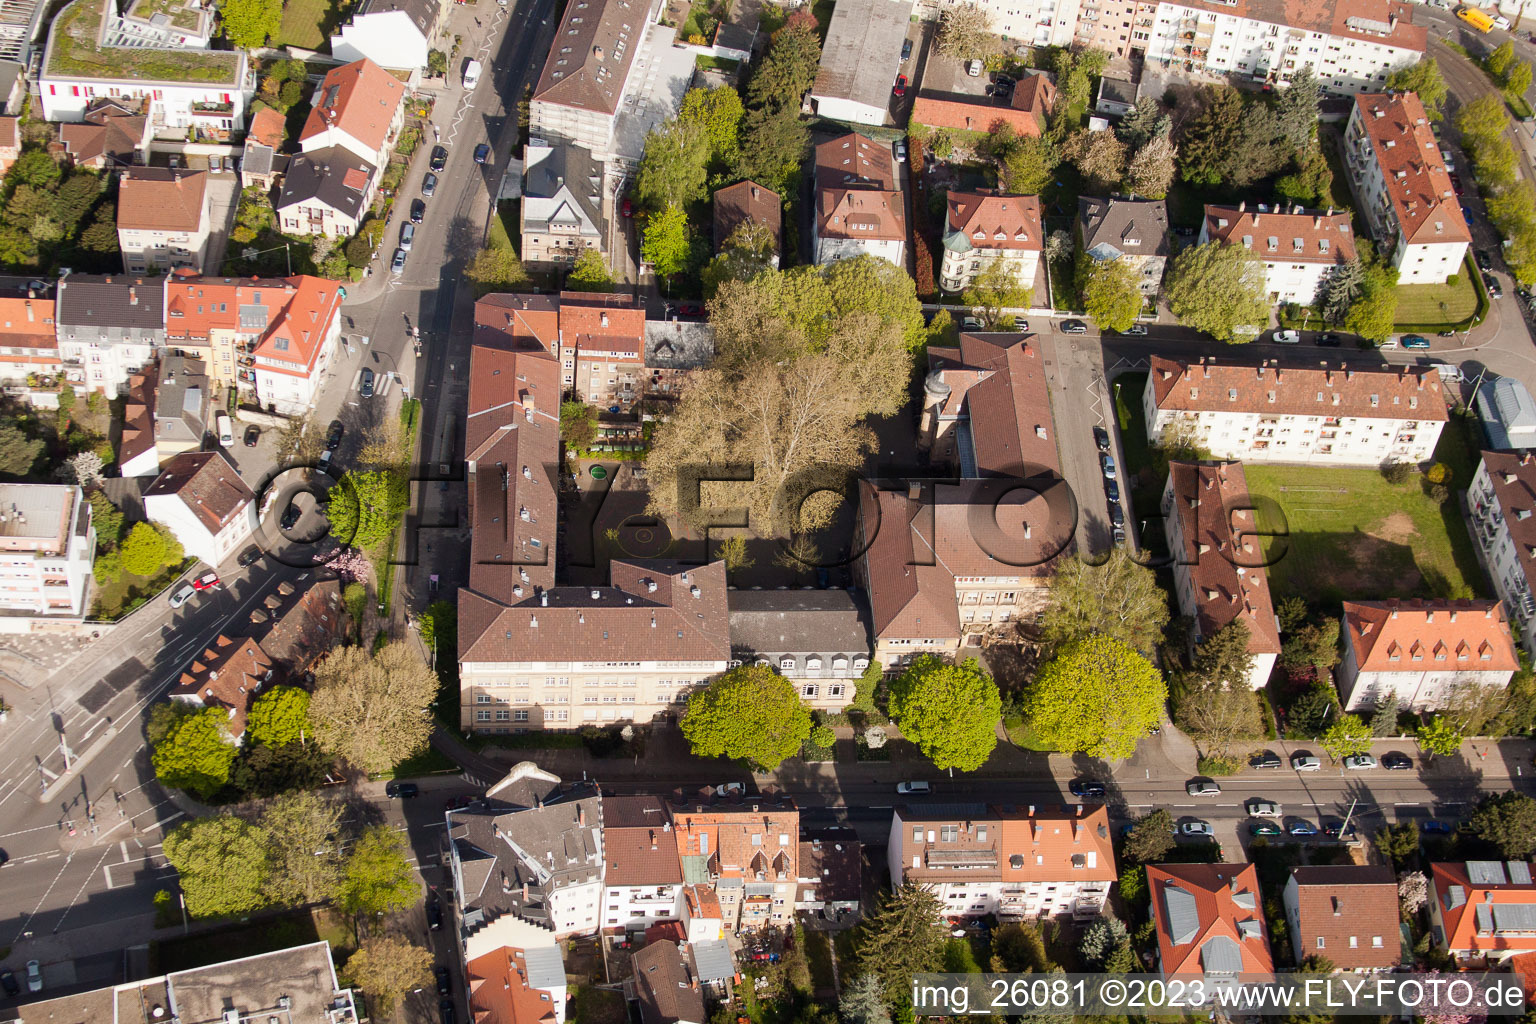 Aerial view of Margrave High School in the district Durlach in Karlsruhe in the state Baden-Wuerttemberg, Germany